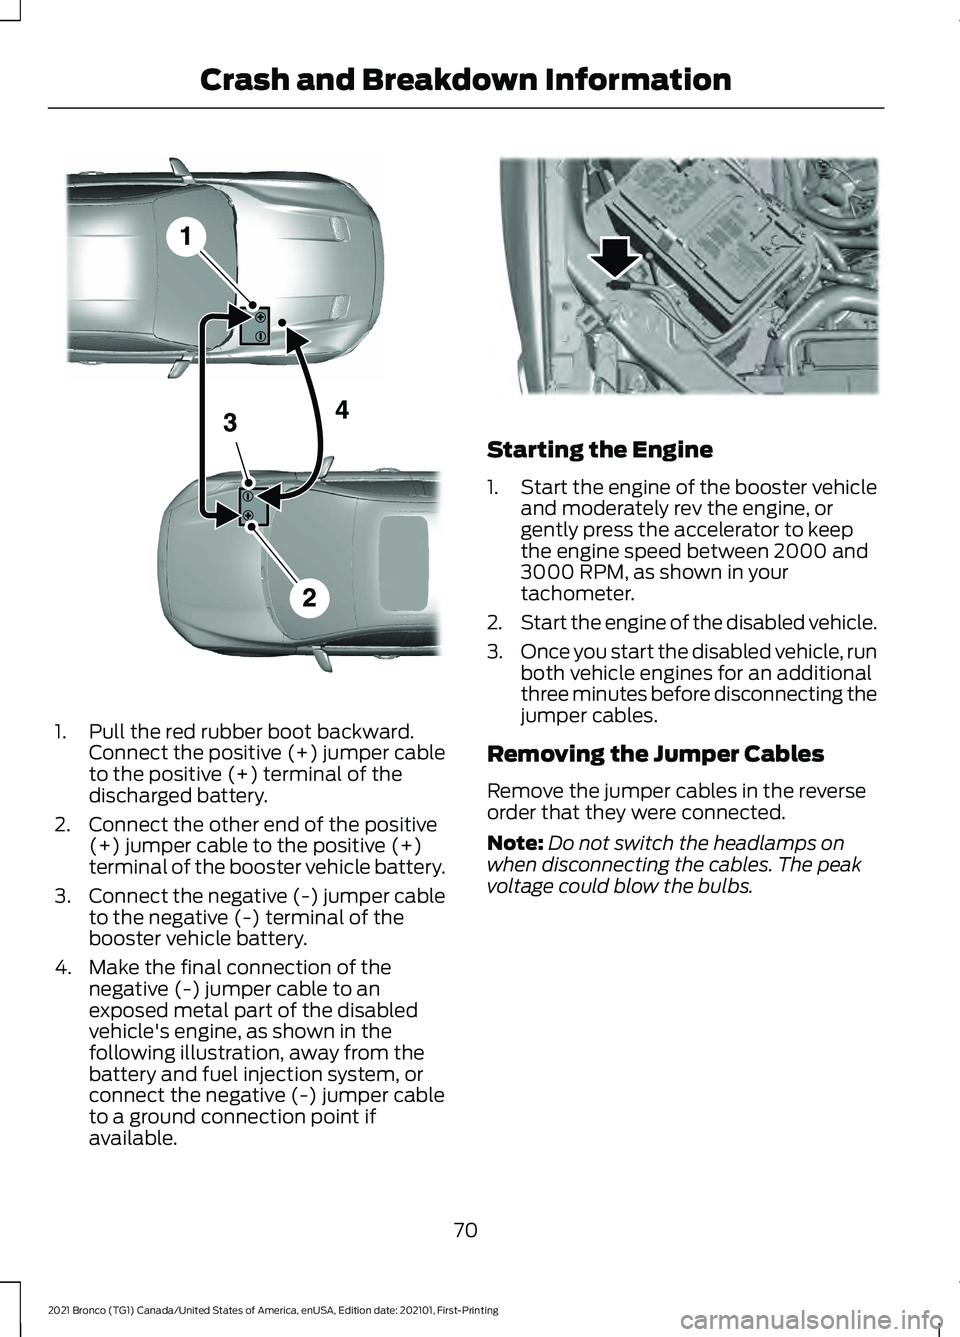 FORD BRONCO 2021  Warranty Guide 1. Pull the red rubber boot backward.
Connect the positive (+) jumper cable
to the positive (+) terminal of the
discharged battery.
2. Connect the other end of the positive (+) jumper cable to the pos